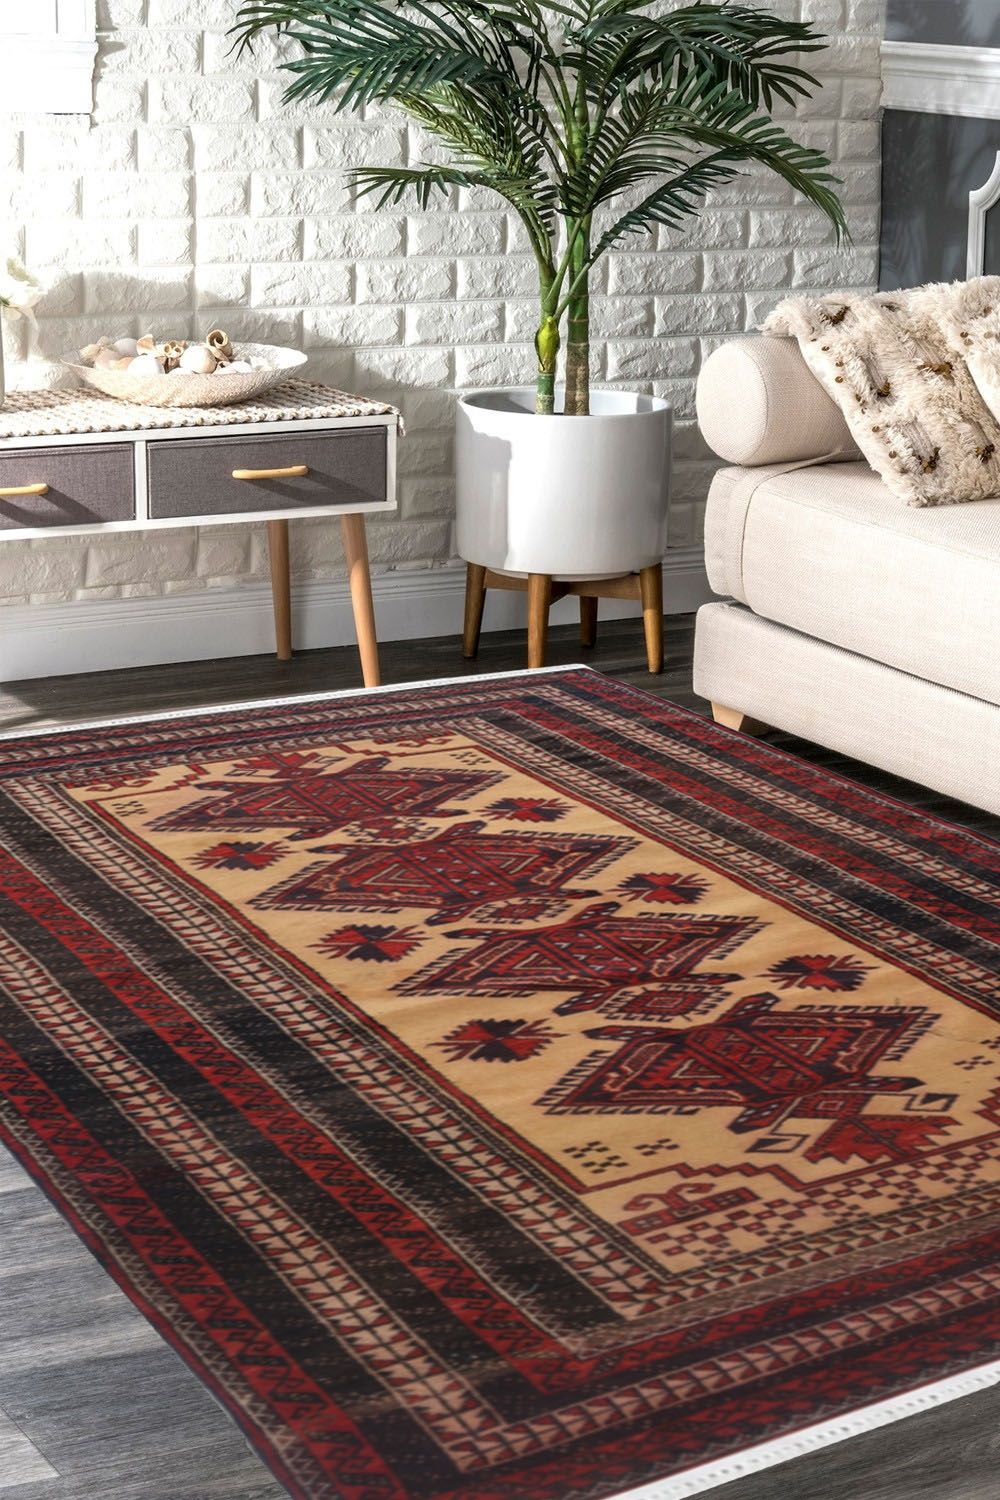 Turkish Afghan Area Rugs And Carpet Online